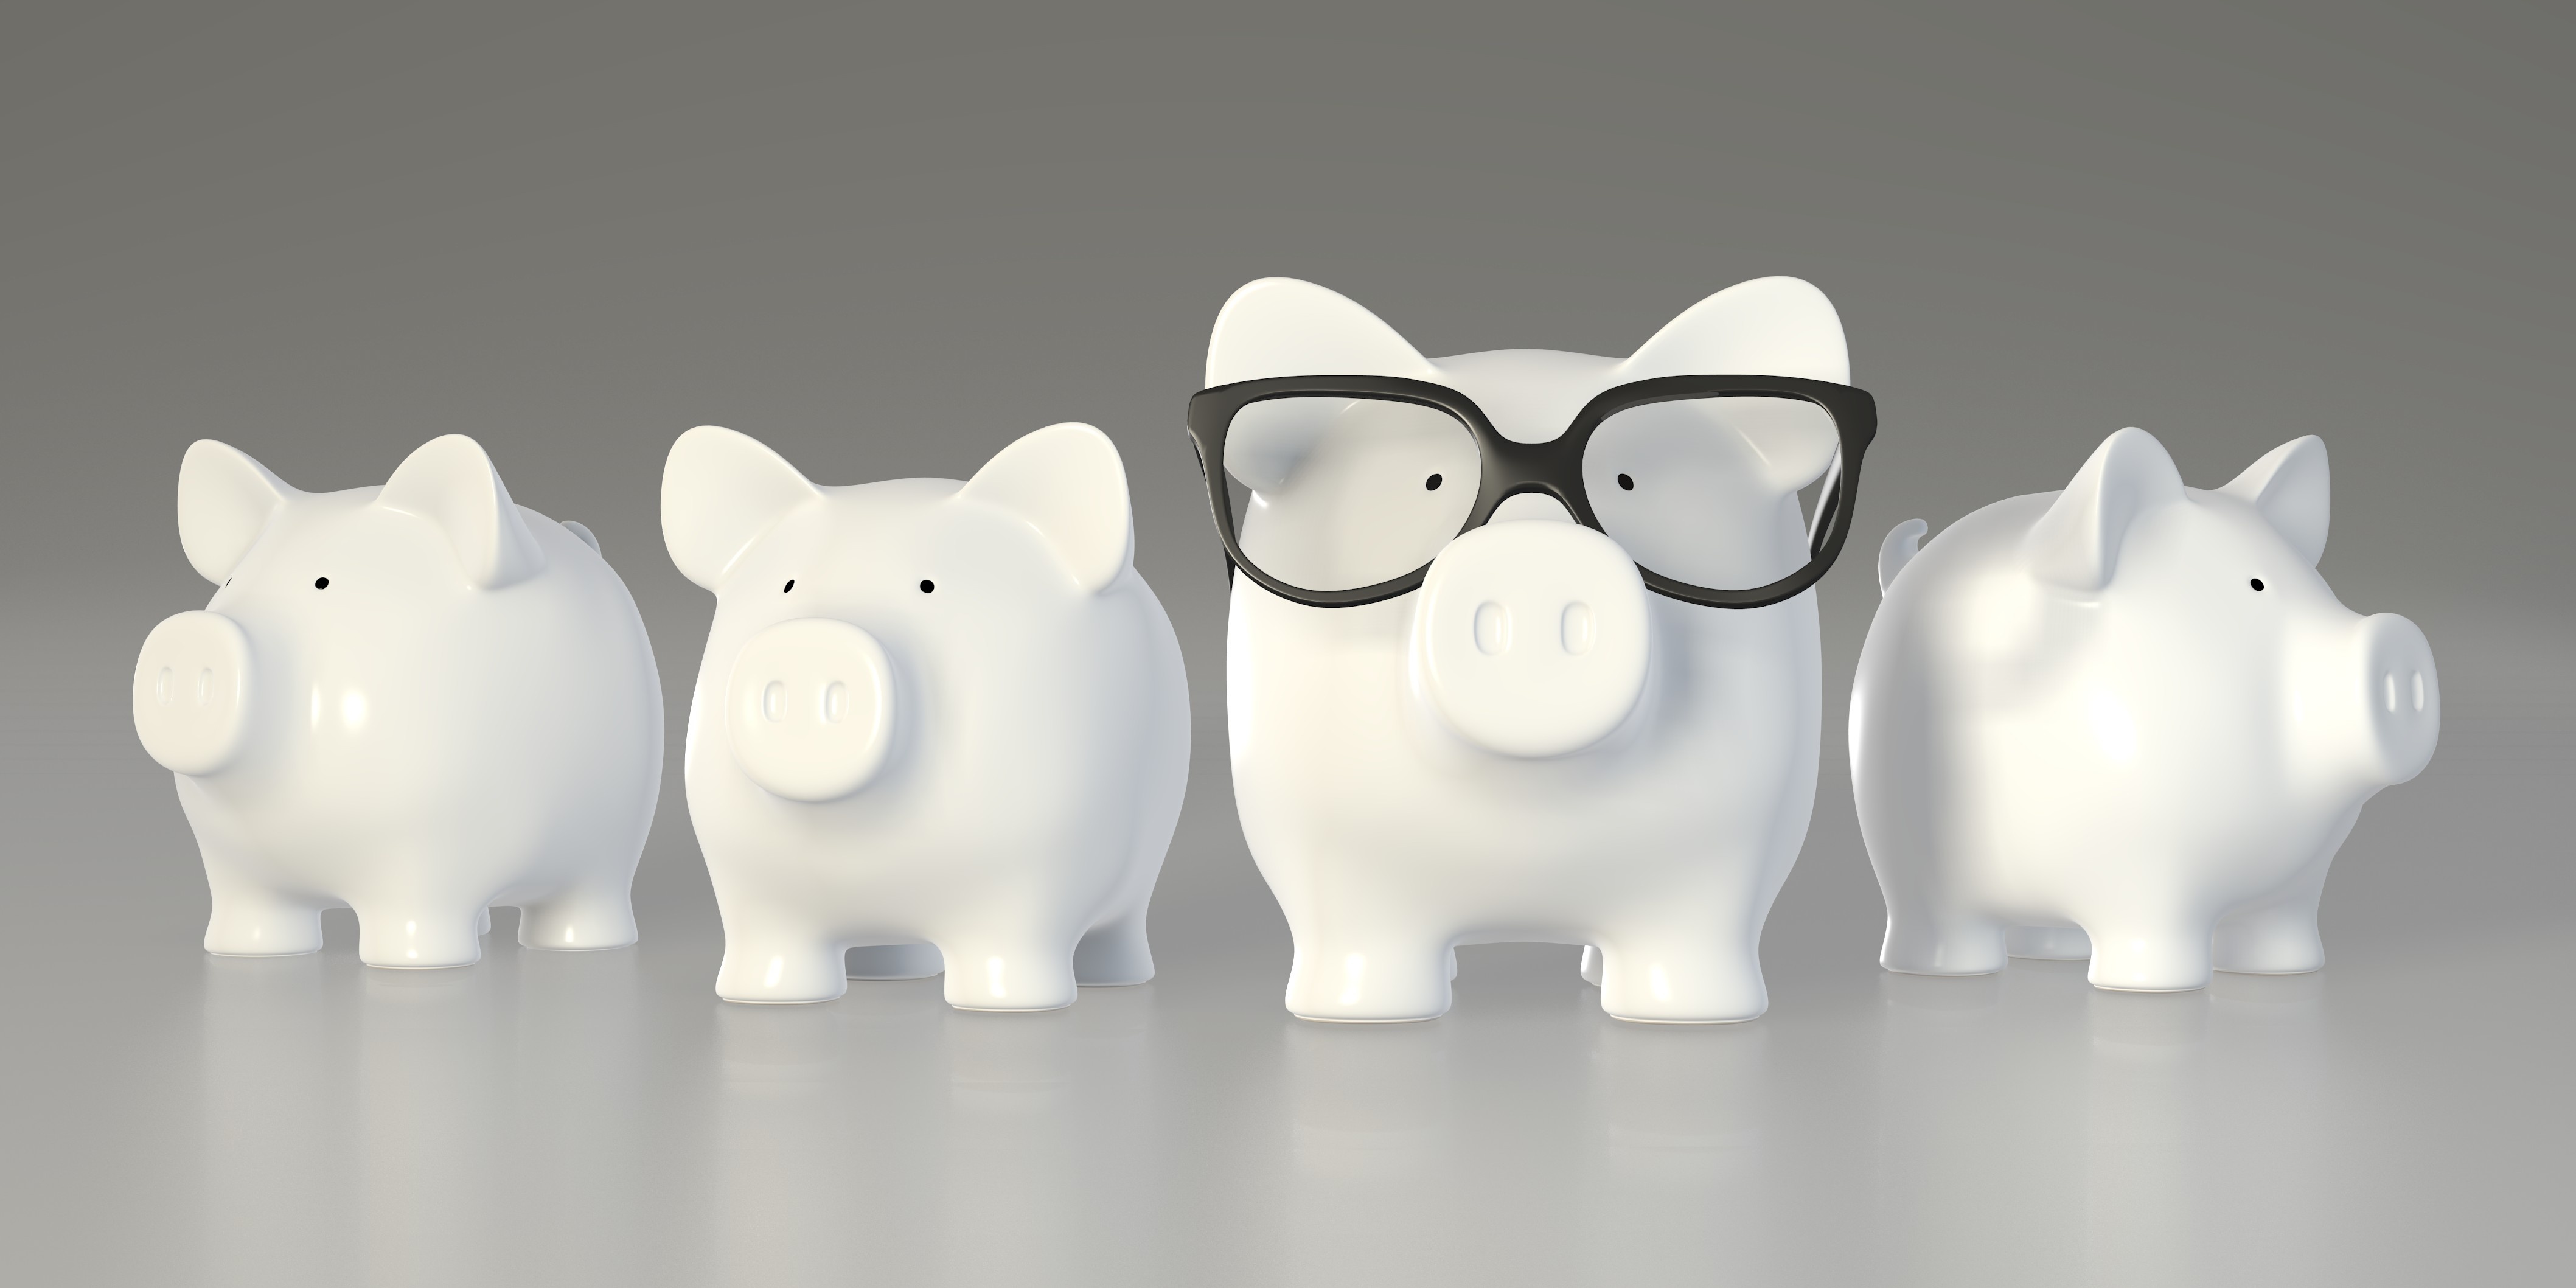 Piggy bank - group with big pig with glasses